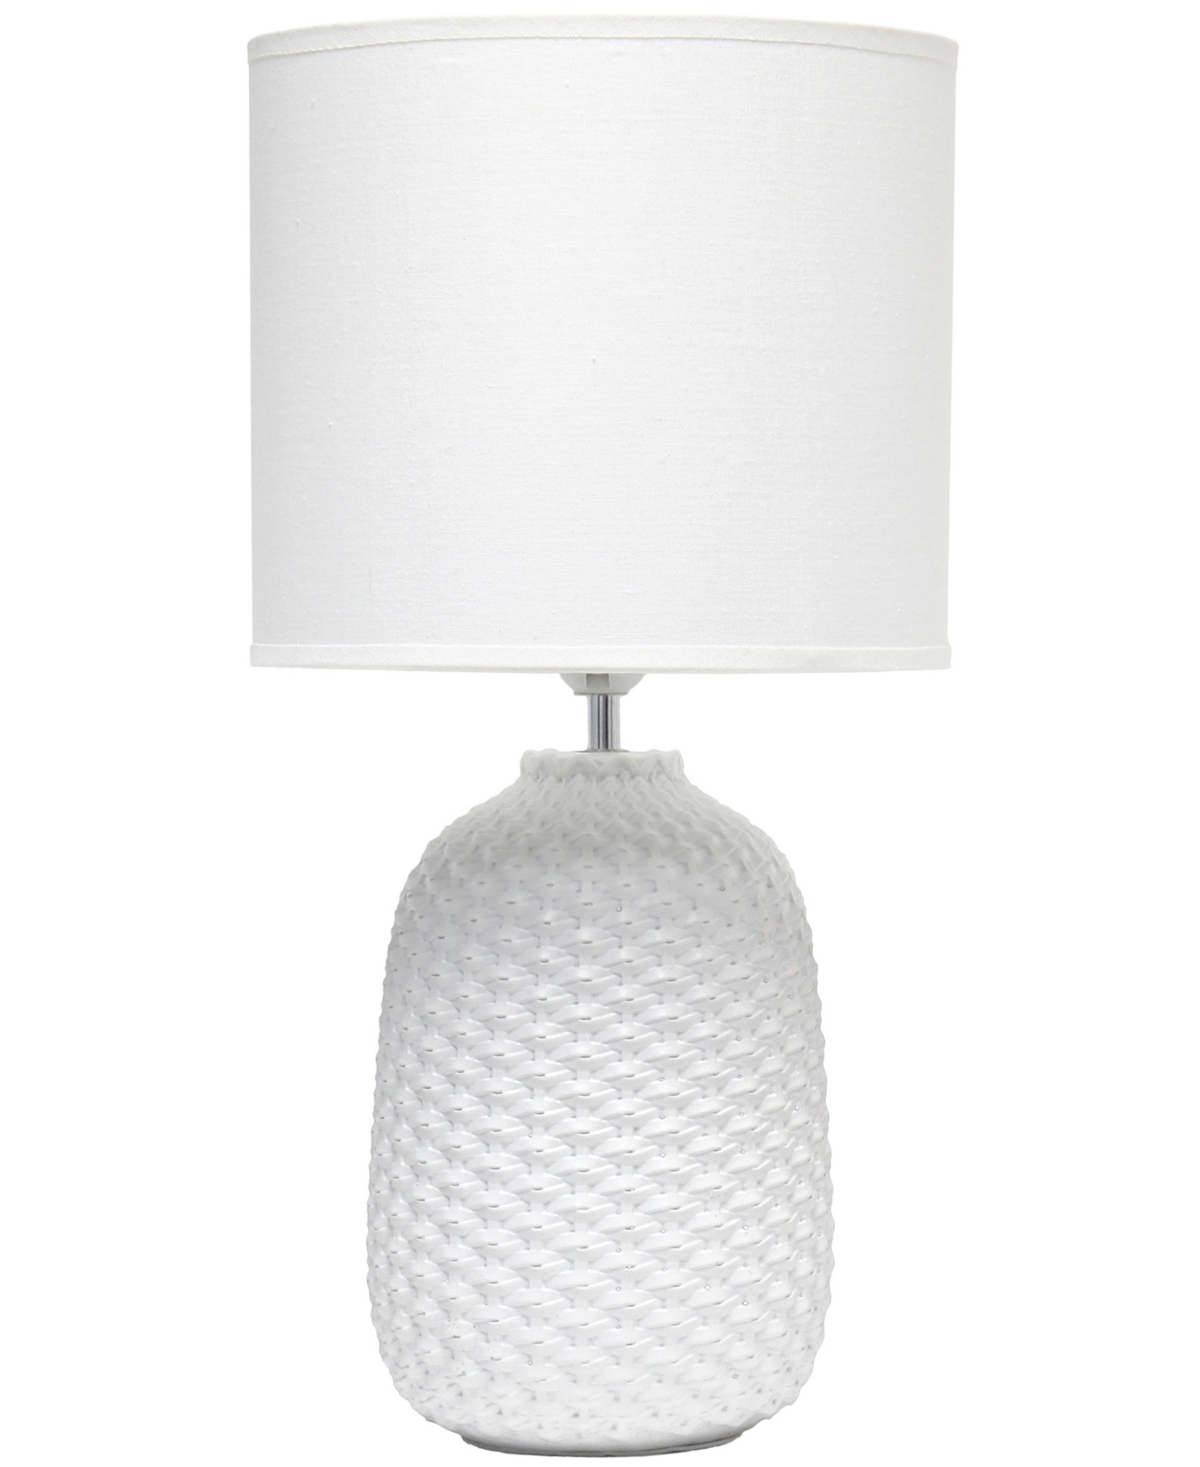 Shop Simple Designs 20.4" Tall Traditional Ceramic Purled Texture Bedside Table Desk Lamp With White Fabric Drum Shade In Off White